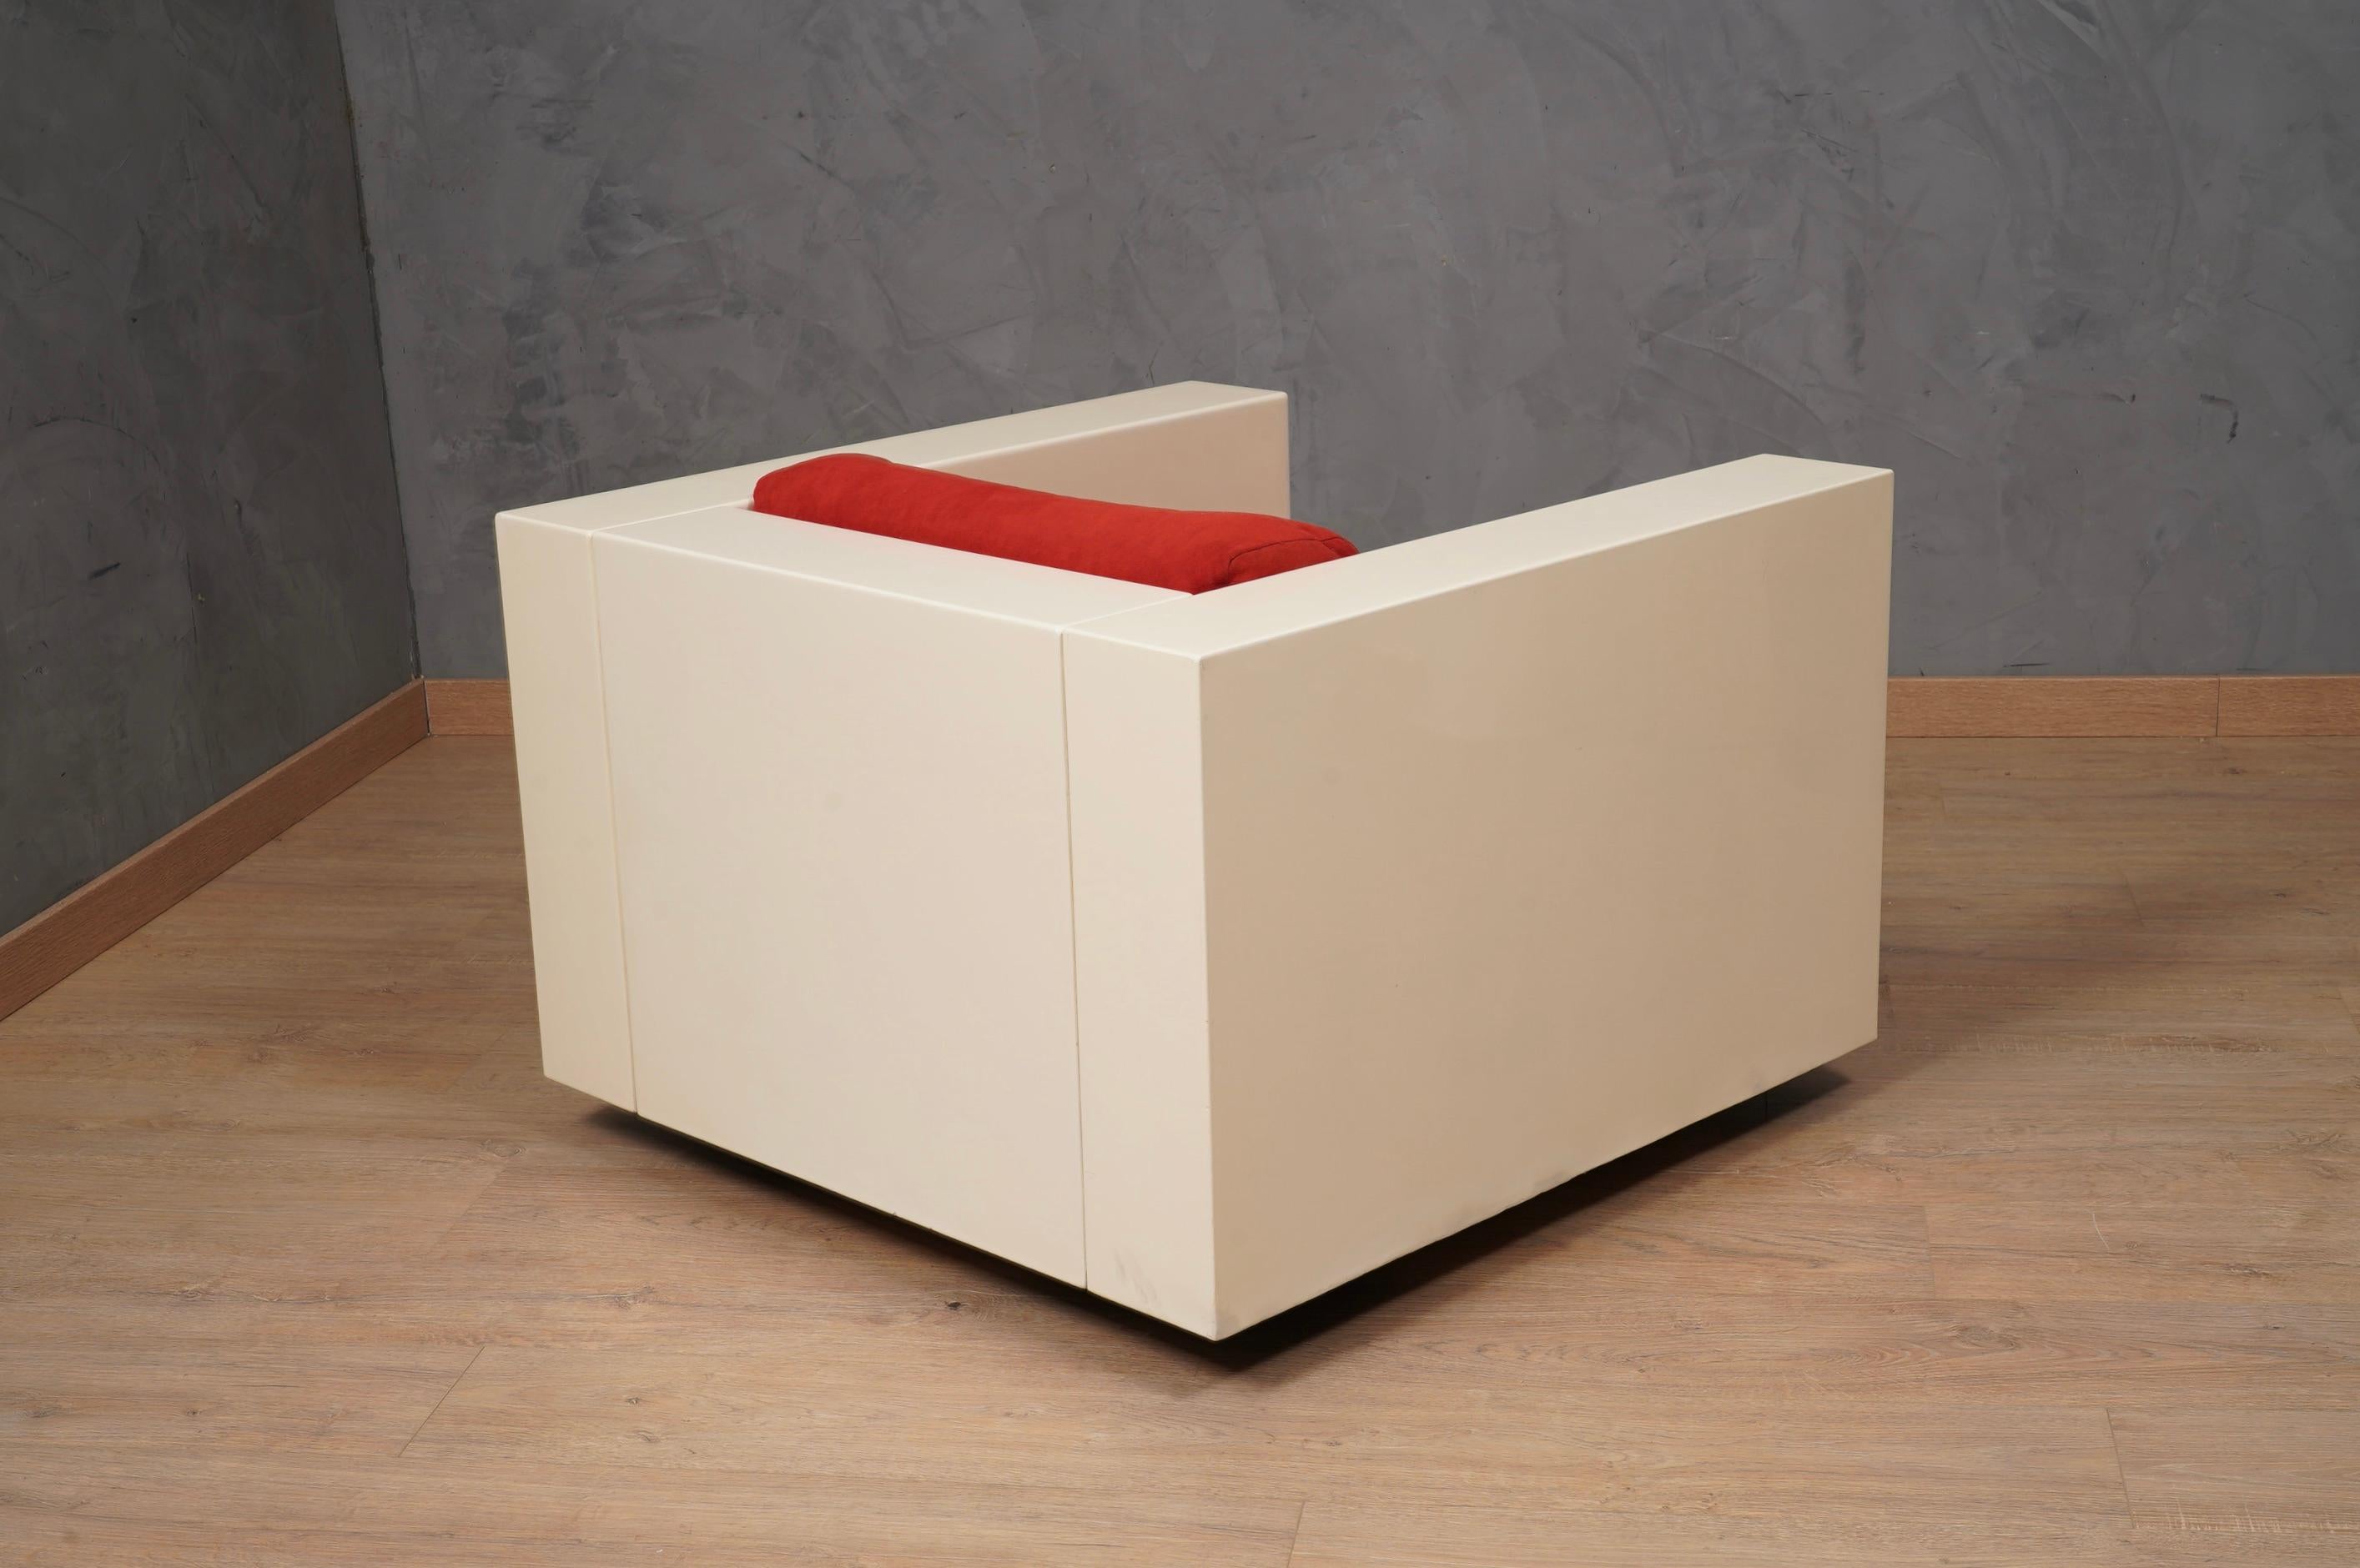 Lacquered MASSIMO VIGNELLI Mod. Saratoga White and Red ArmChair, 1964 For Sale